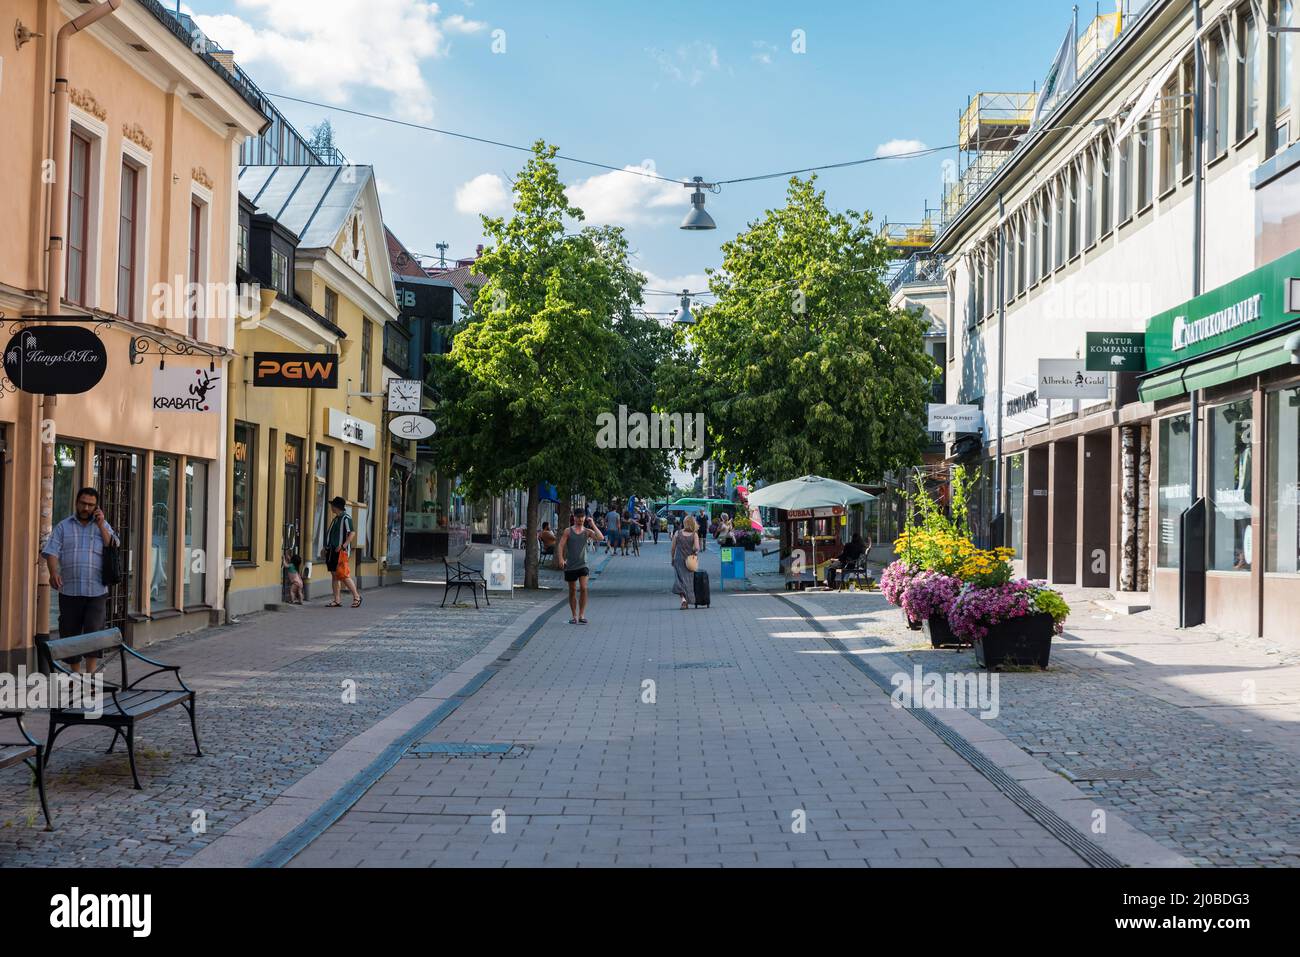 Uppsala, Uppland  Sweden - 07 27 2019- People of mixed ages and gender walking through the shopping streets of the city center Stock Photo